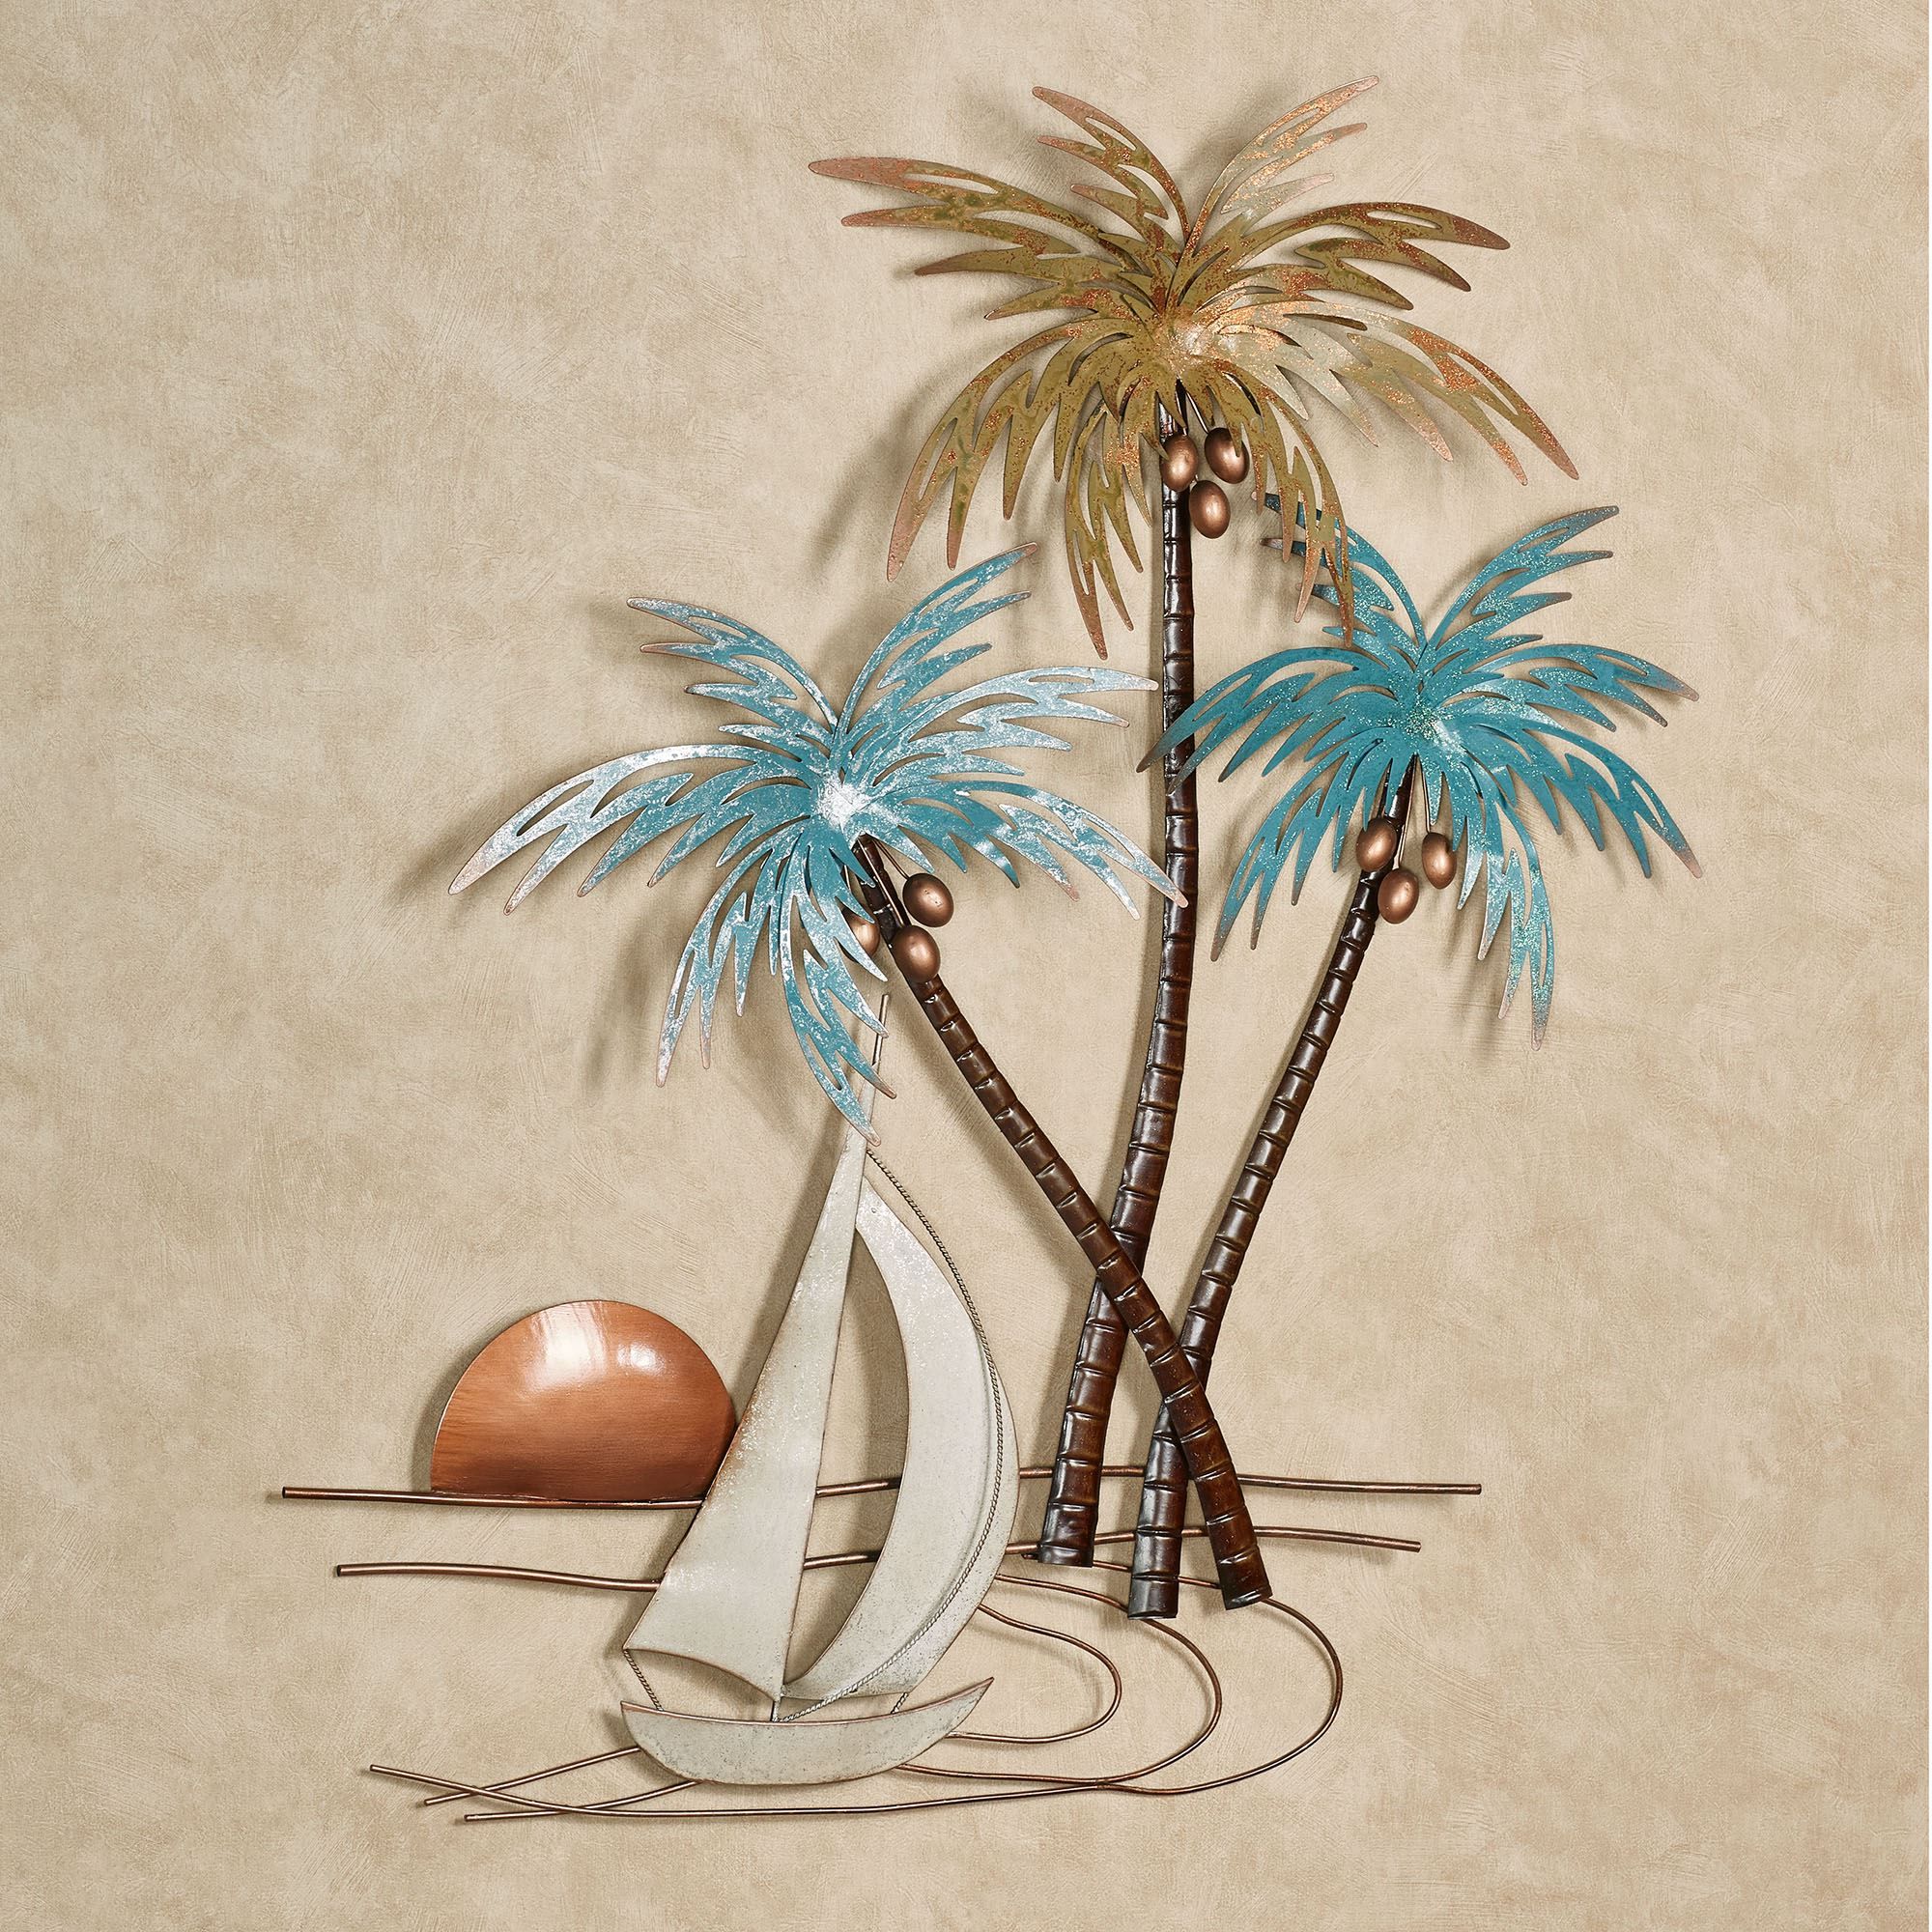 Best And Newest Desert Palms Wall Art With Regard To Sunset Paradise Tropical Palm Tree Metal Wall Art (View 11 of 15)